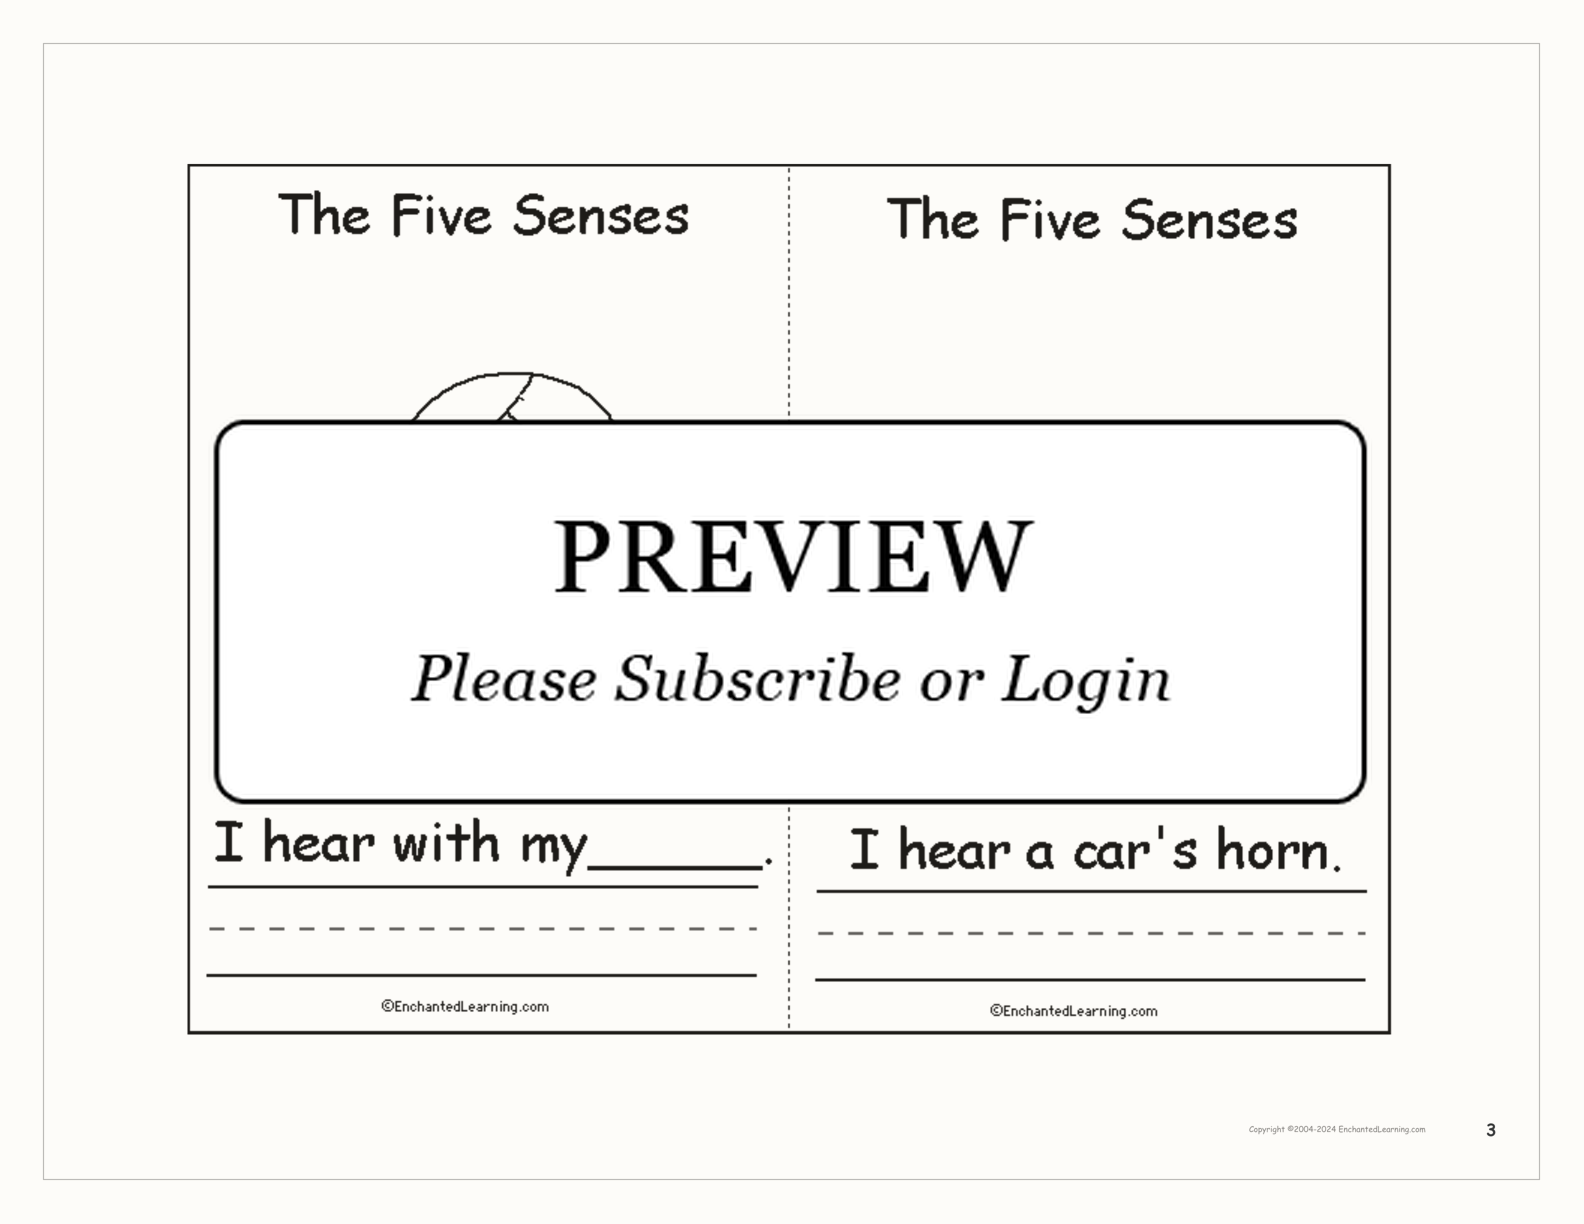 The Five Senses - Printable Book interactive worksheet page 3